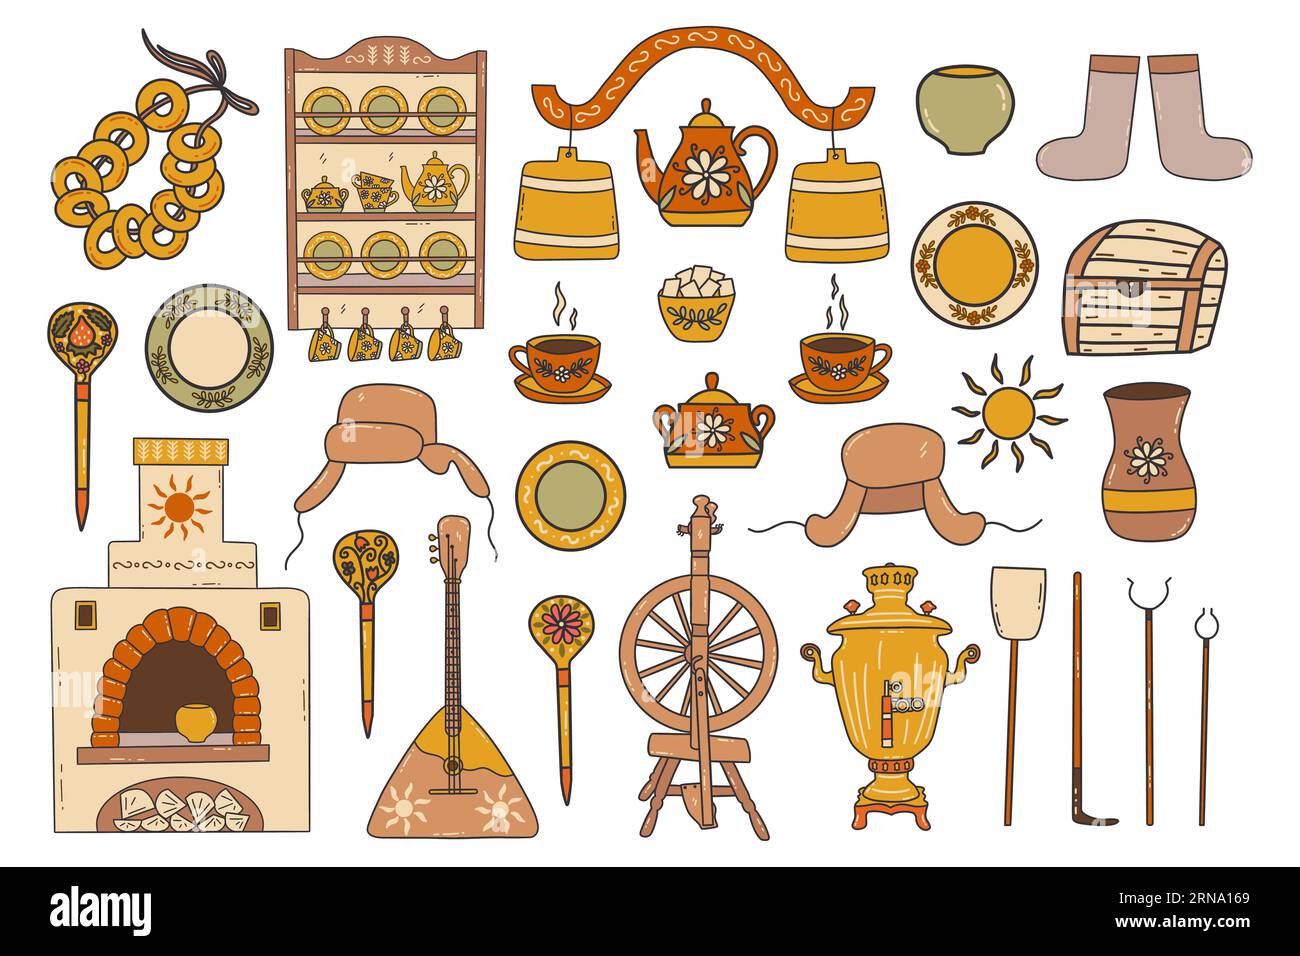 Set of Russian village elements. Ancient Russian culture. Stove and samovar, yoke and spinning wheel, tea set and earthenware. Colorful vector isolate Stock Vector